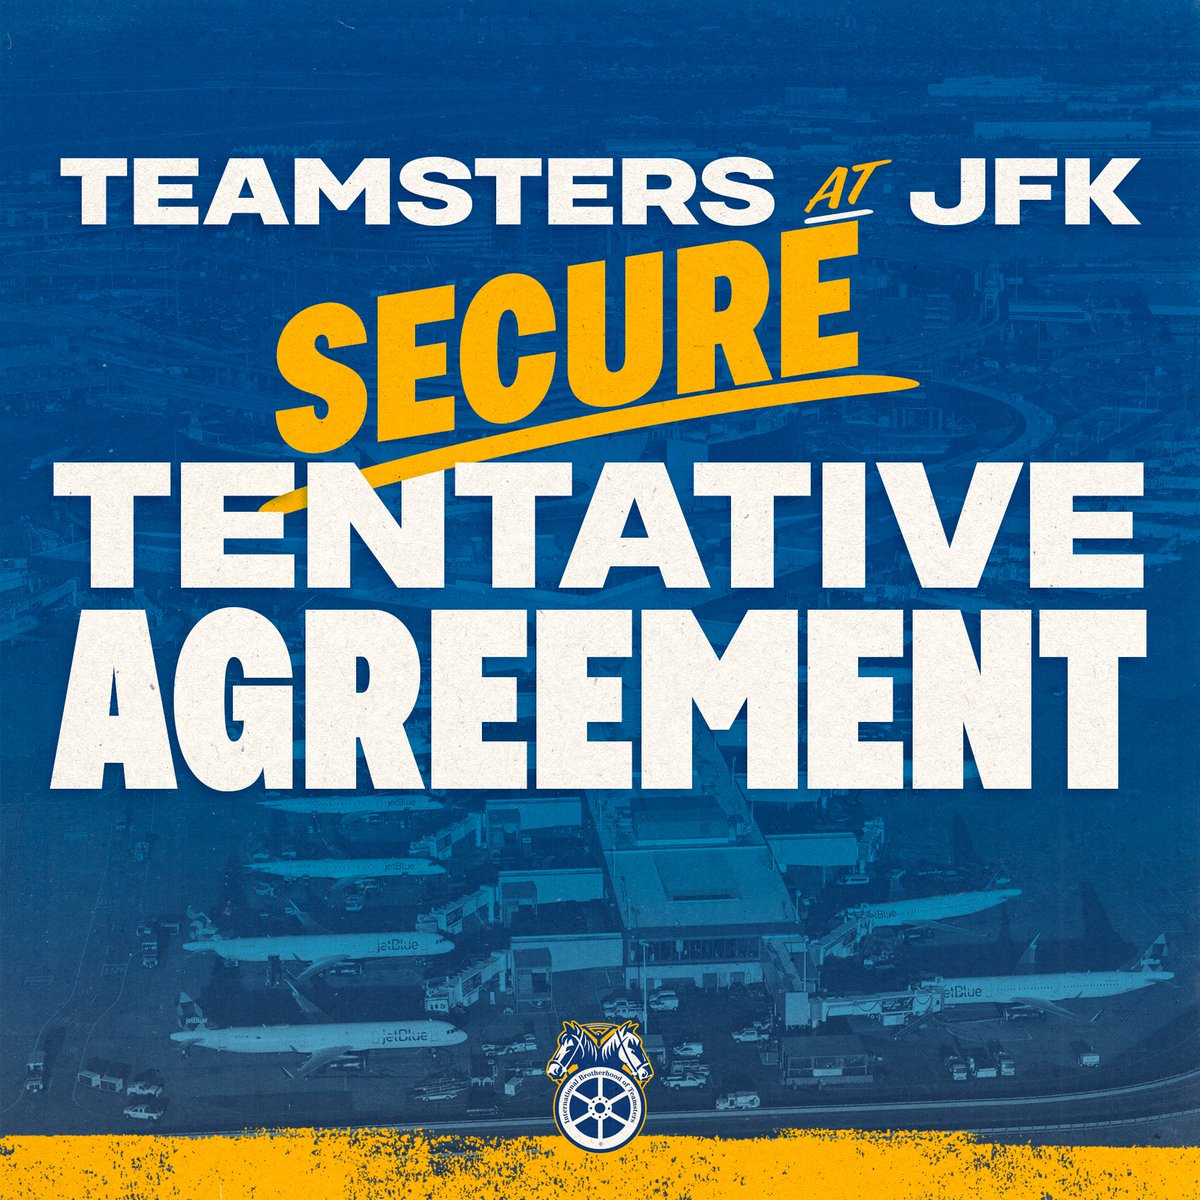 TEAMSTERS AT JFK AIRPORT SECURE TENTATIVE AGREEMENT, AVOIDING FUEL OPERATIONS STRIKE Teamsters Local 553 has reached an agreement with Allied Aviation Services Inc. at JFK Airport in New York City, avoiding a strike on Memorial Day weekend. Local 553 members proudly run the